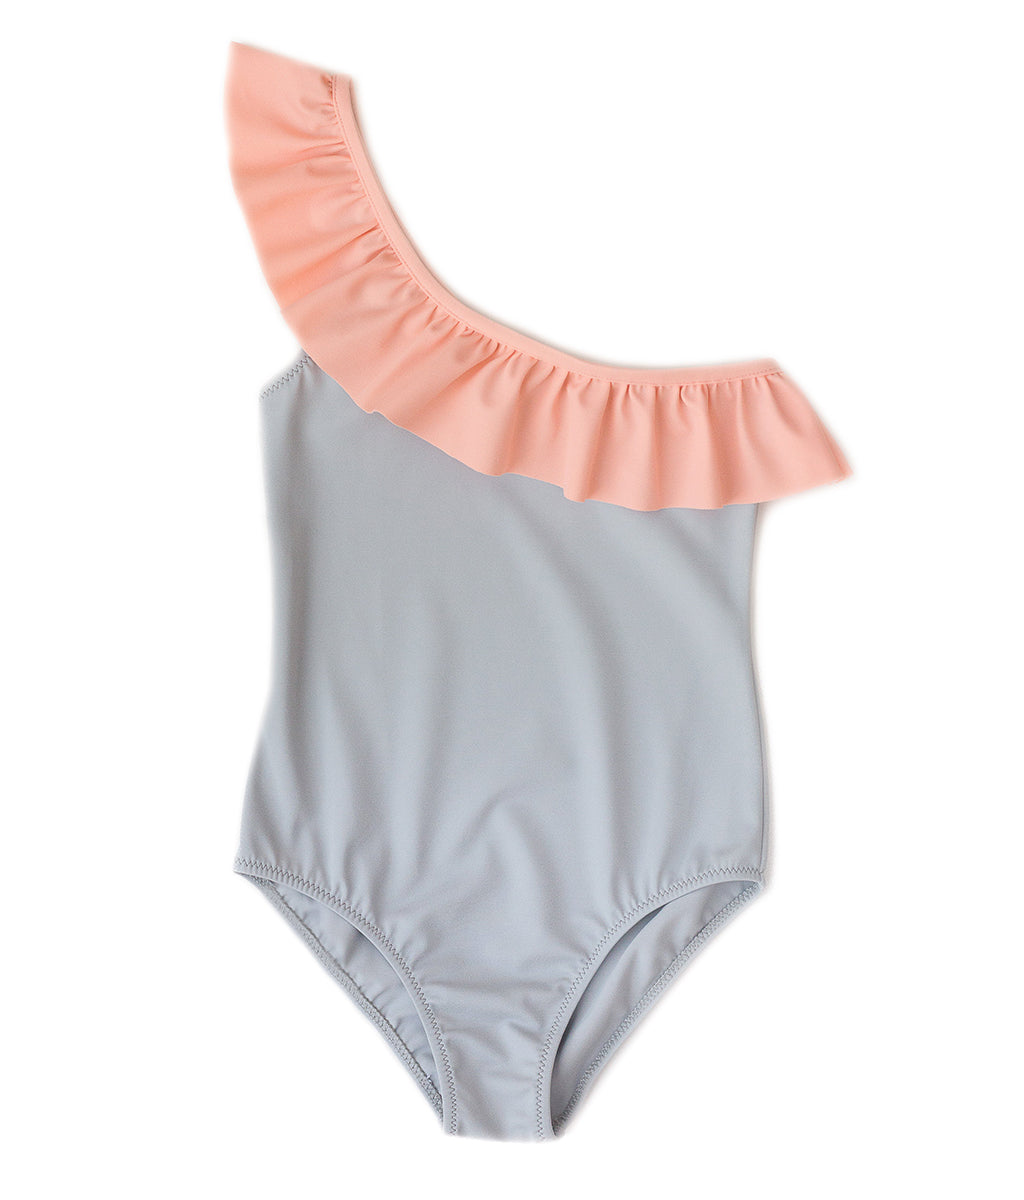 Carlotta Surf Suit in Coral Pink & Peach Pink - Folpetto